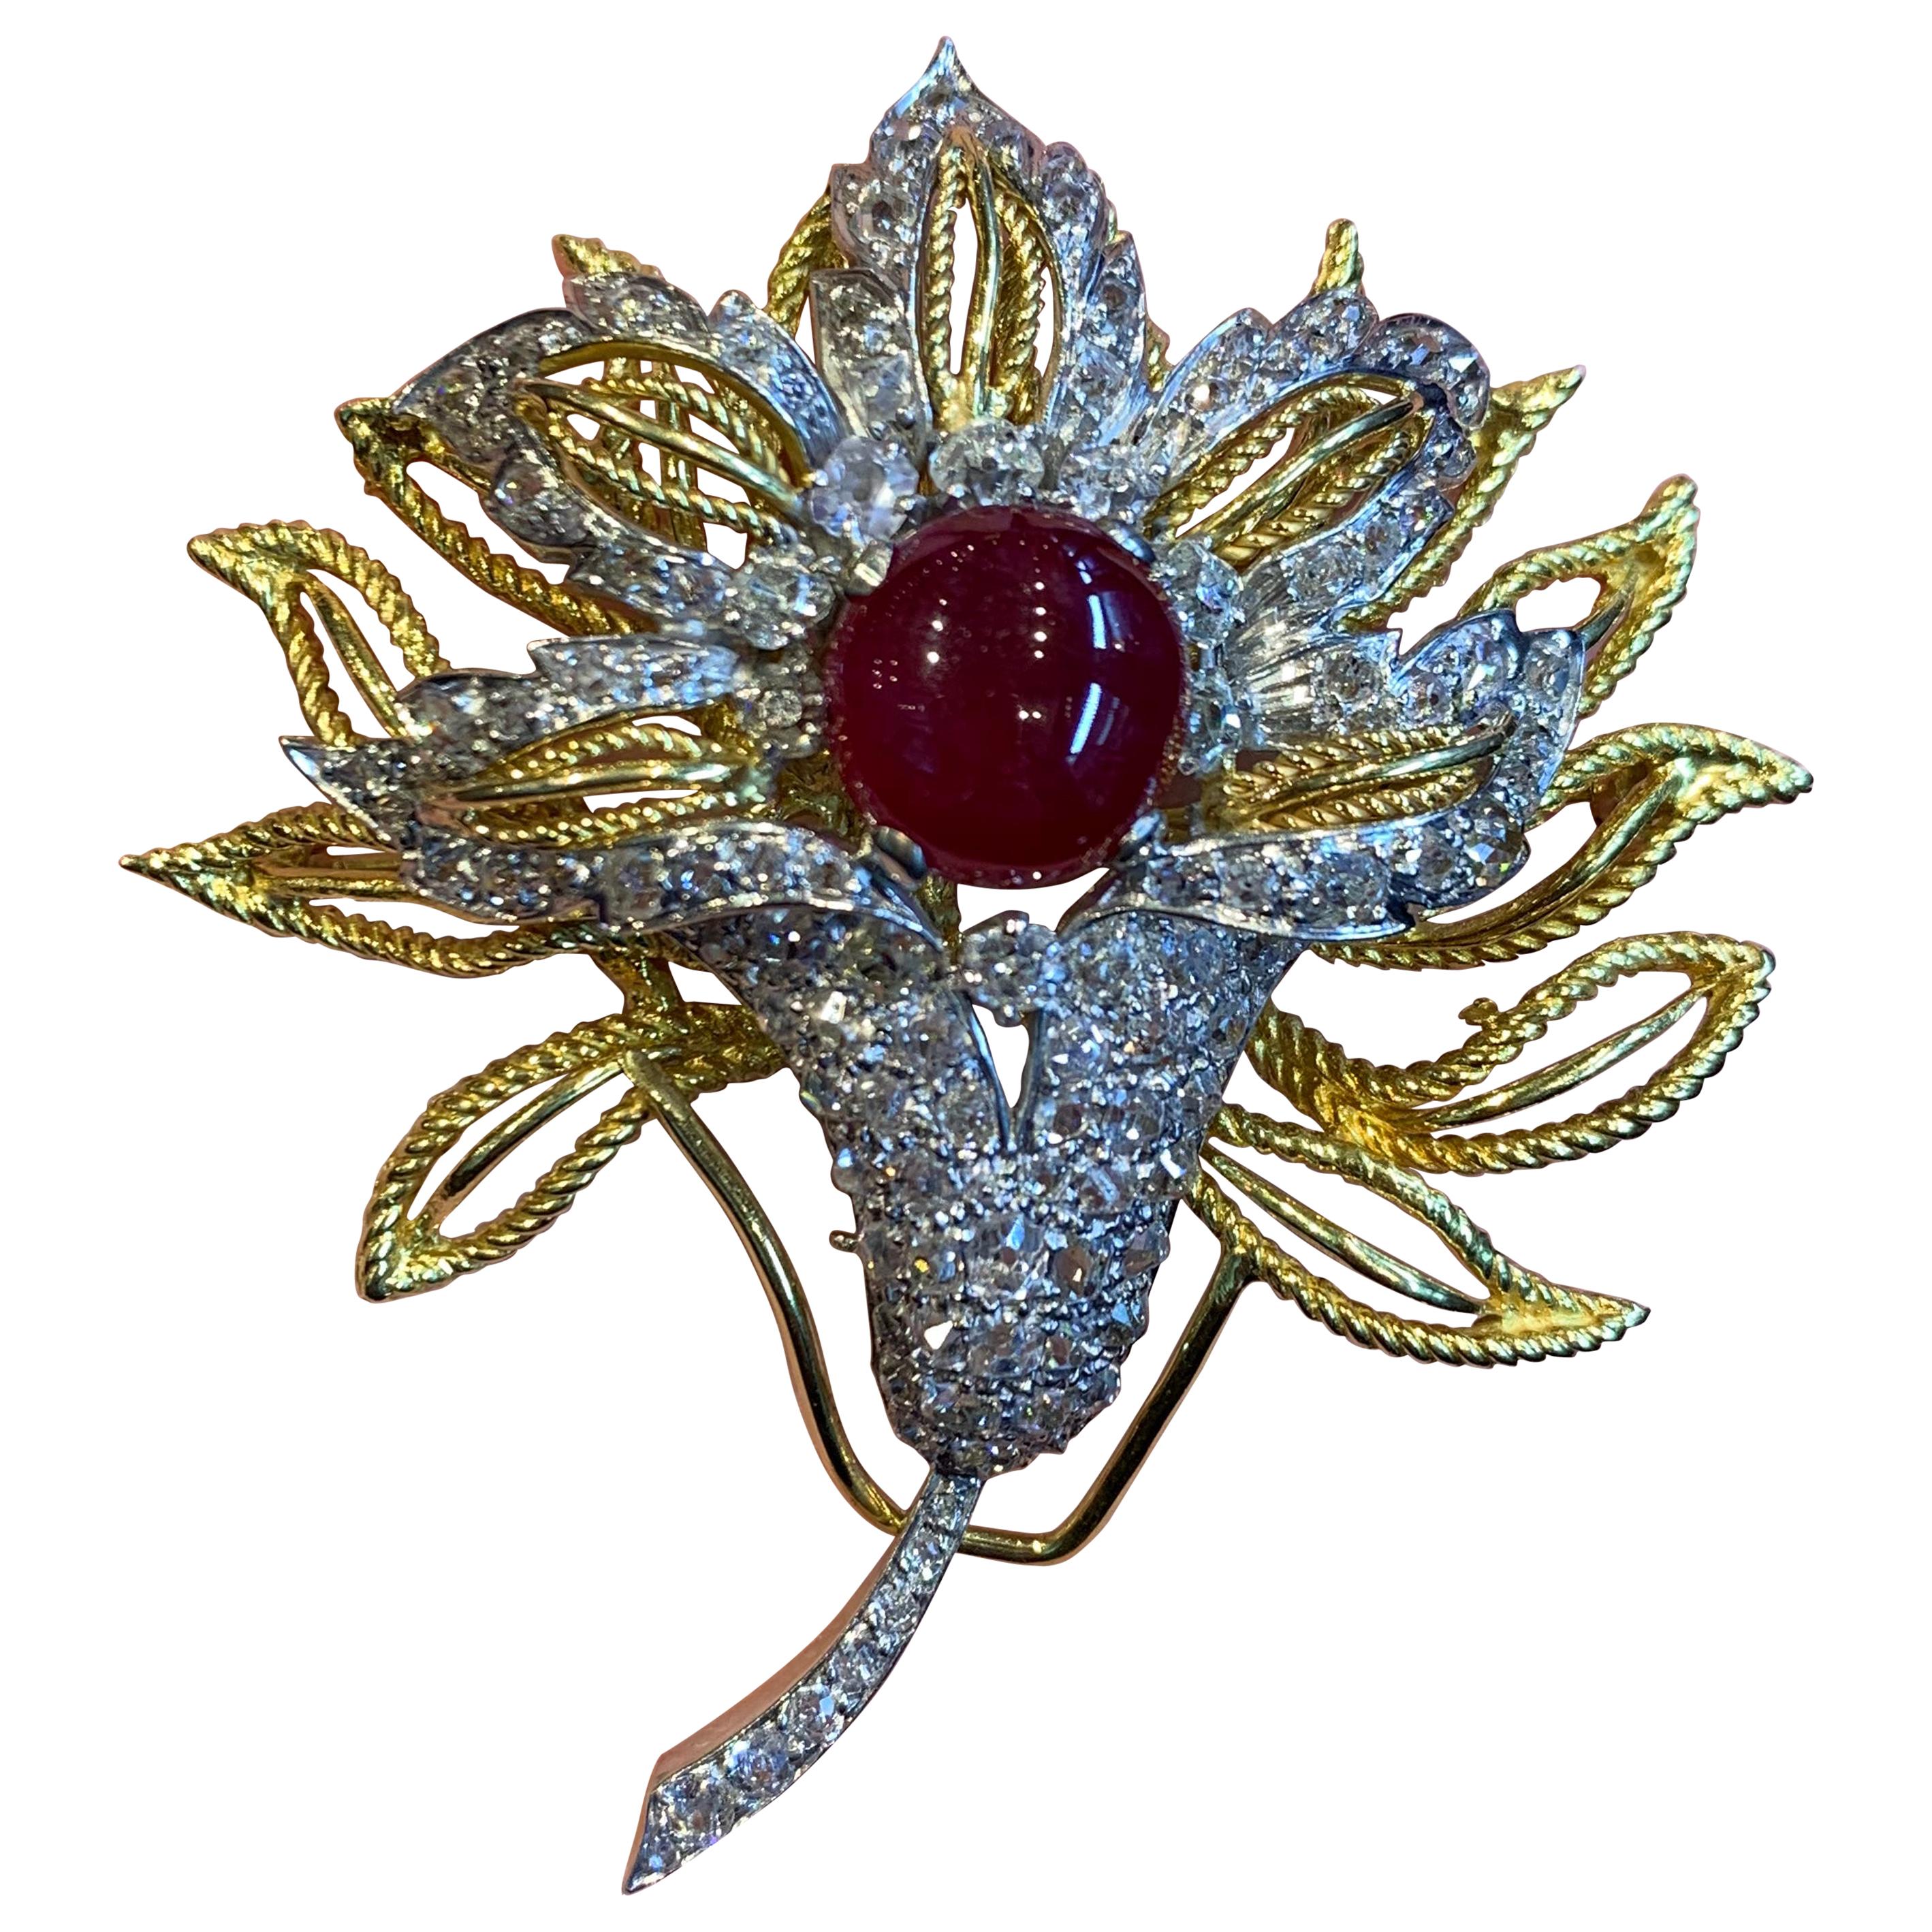 Cabochon Ruby and Diamond Flower Brooch